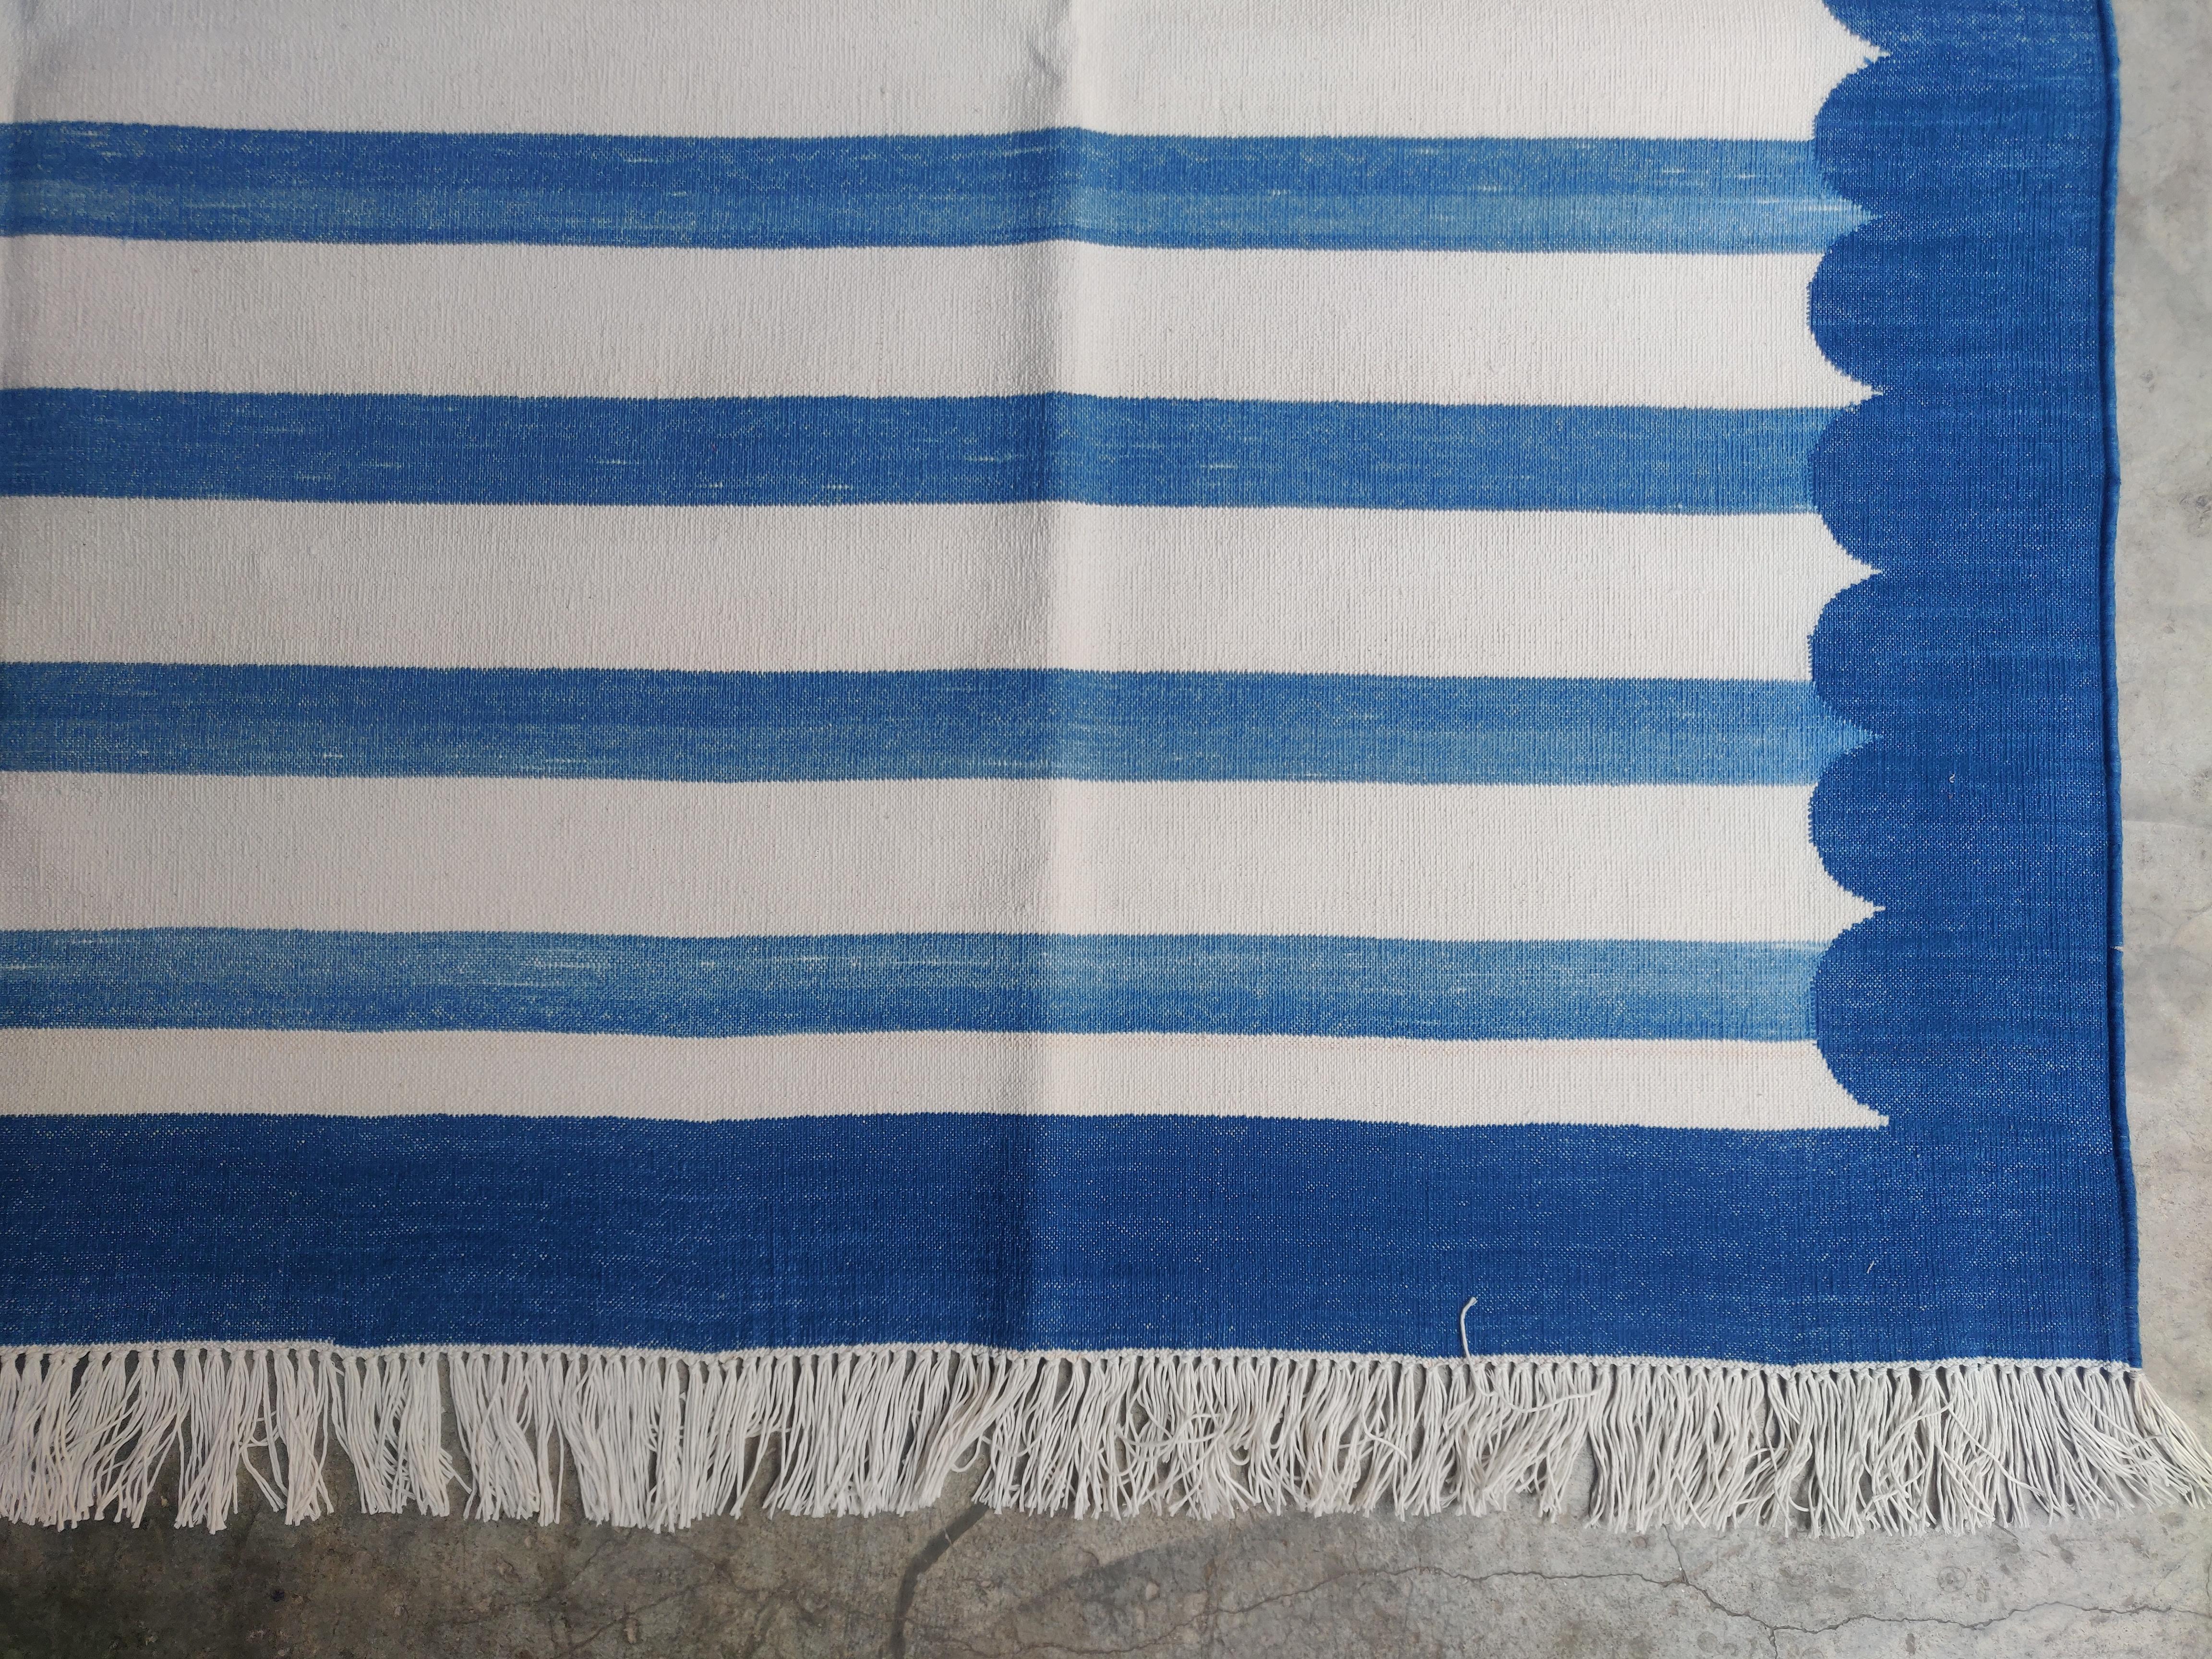 Handmade Cotton Area Flat Weave Rug, 6x9 Blue And White Striped Indian Dhurrie In New Condition For Sale In Jaipur, IN